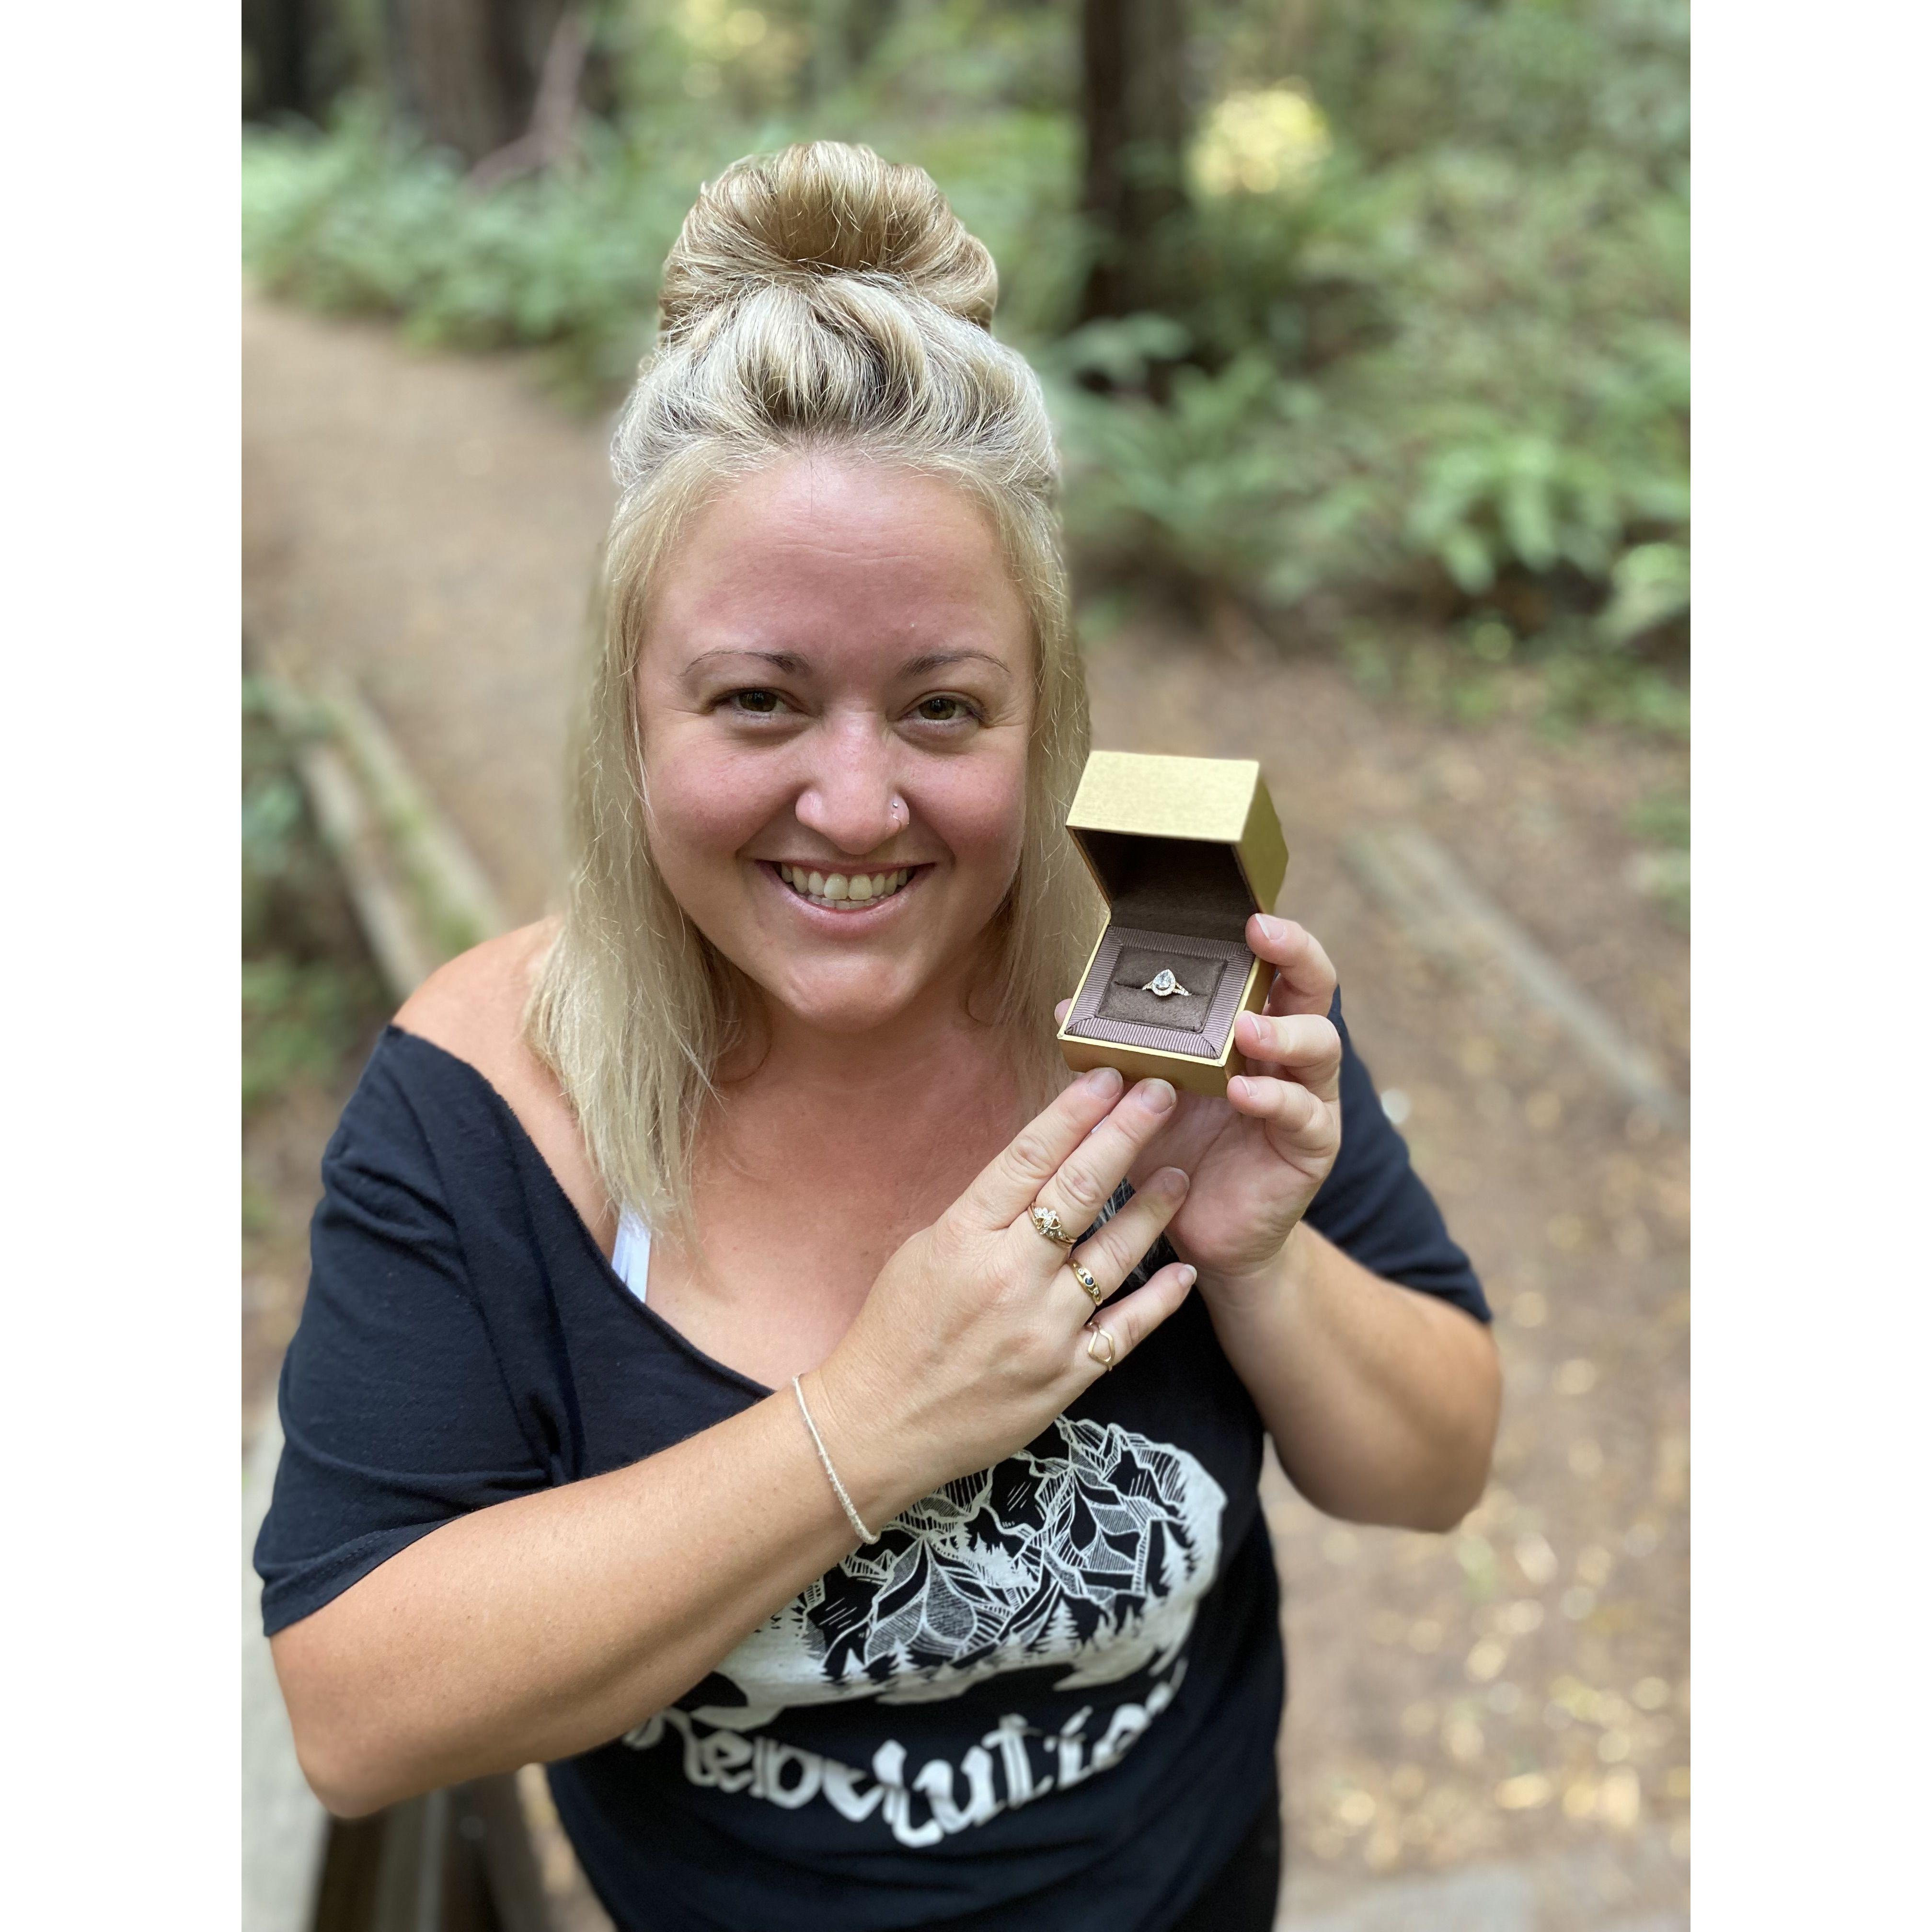 Lithe popped the question in the Humboldt Redwoods off the Avenue of Giants on 8/29/2020.